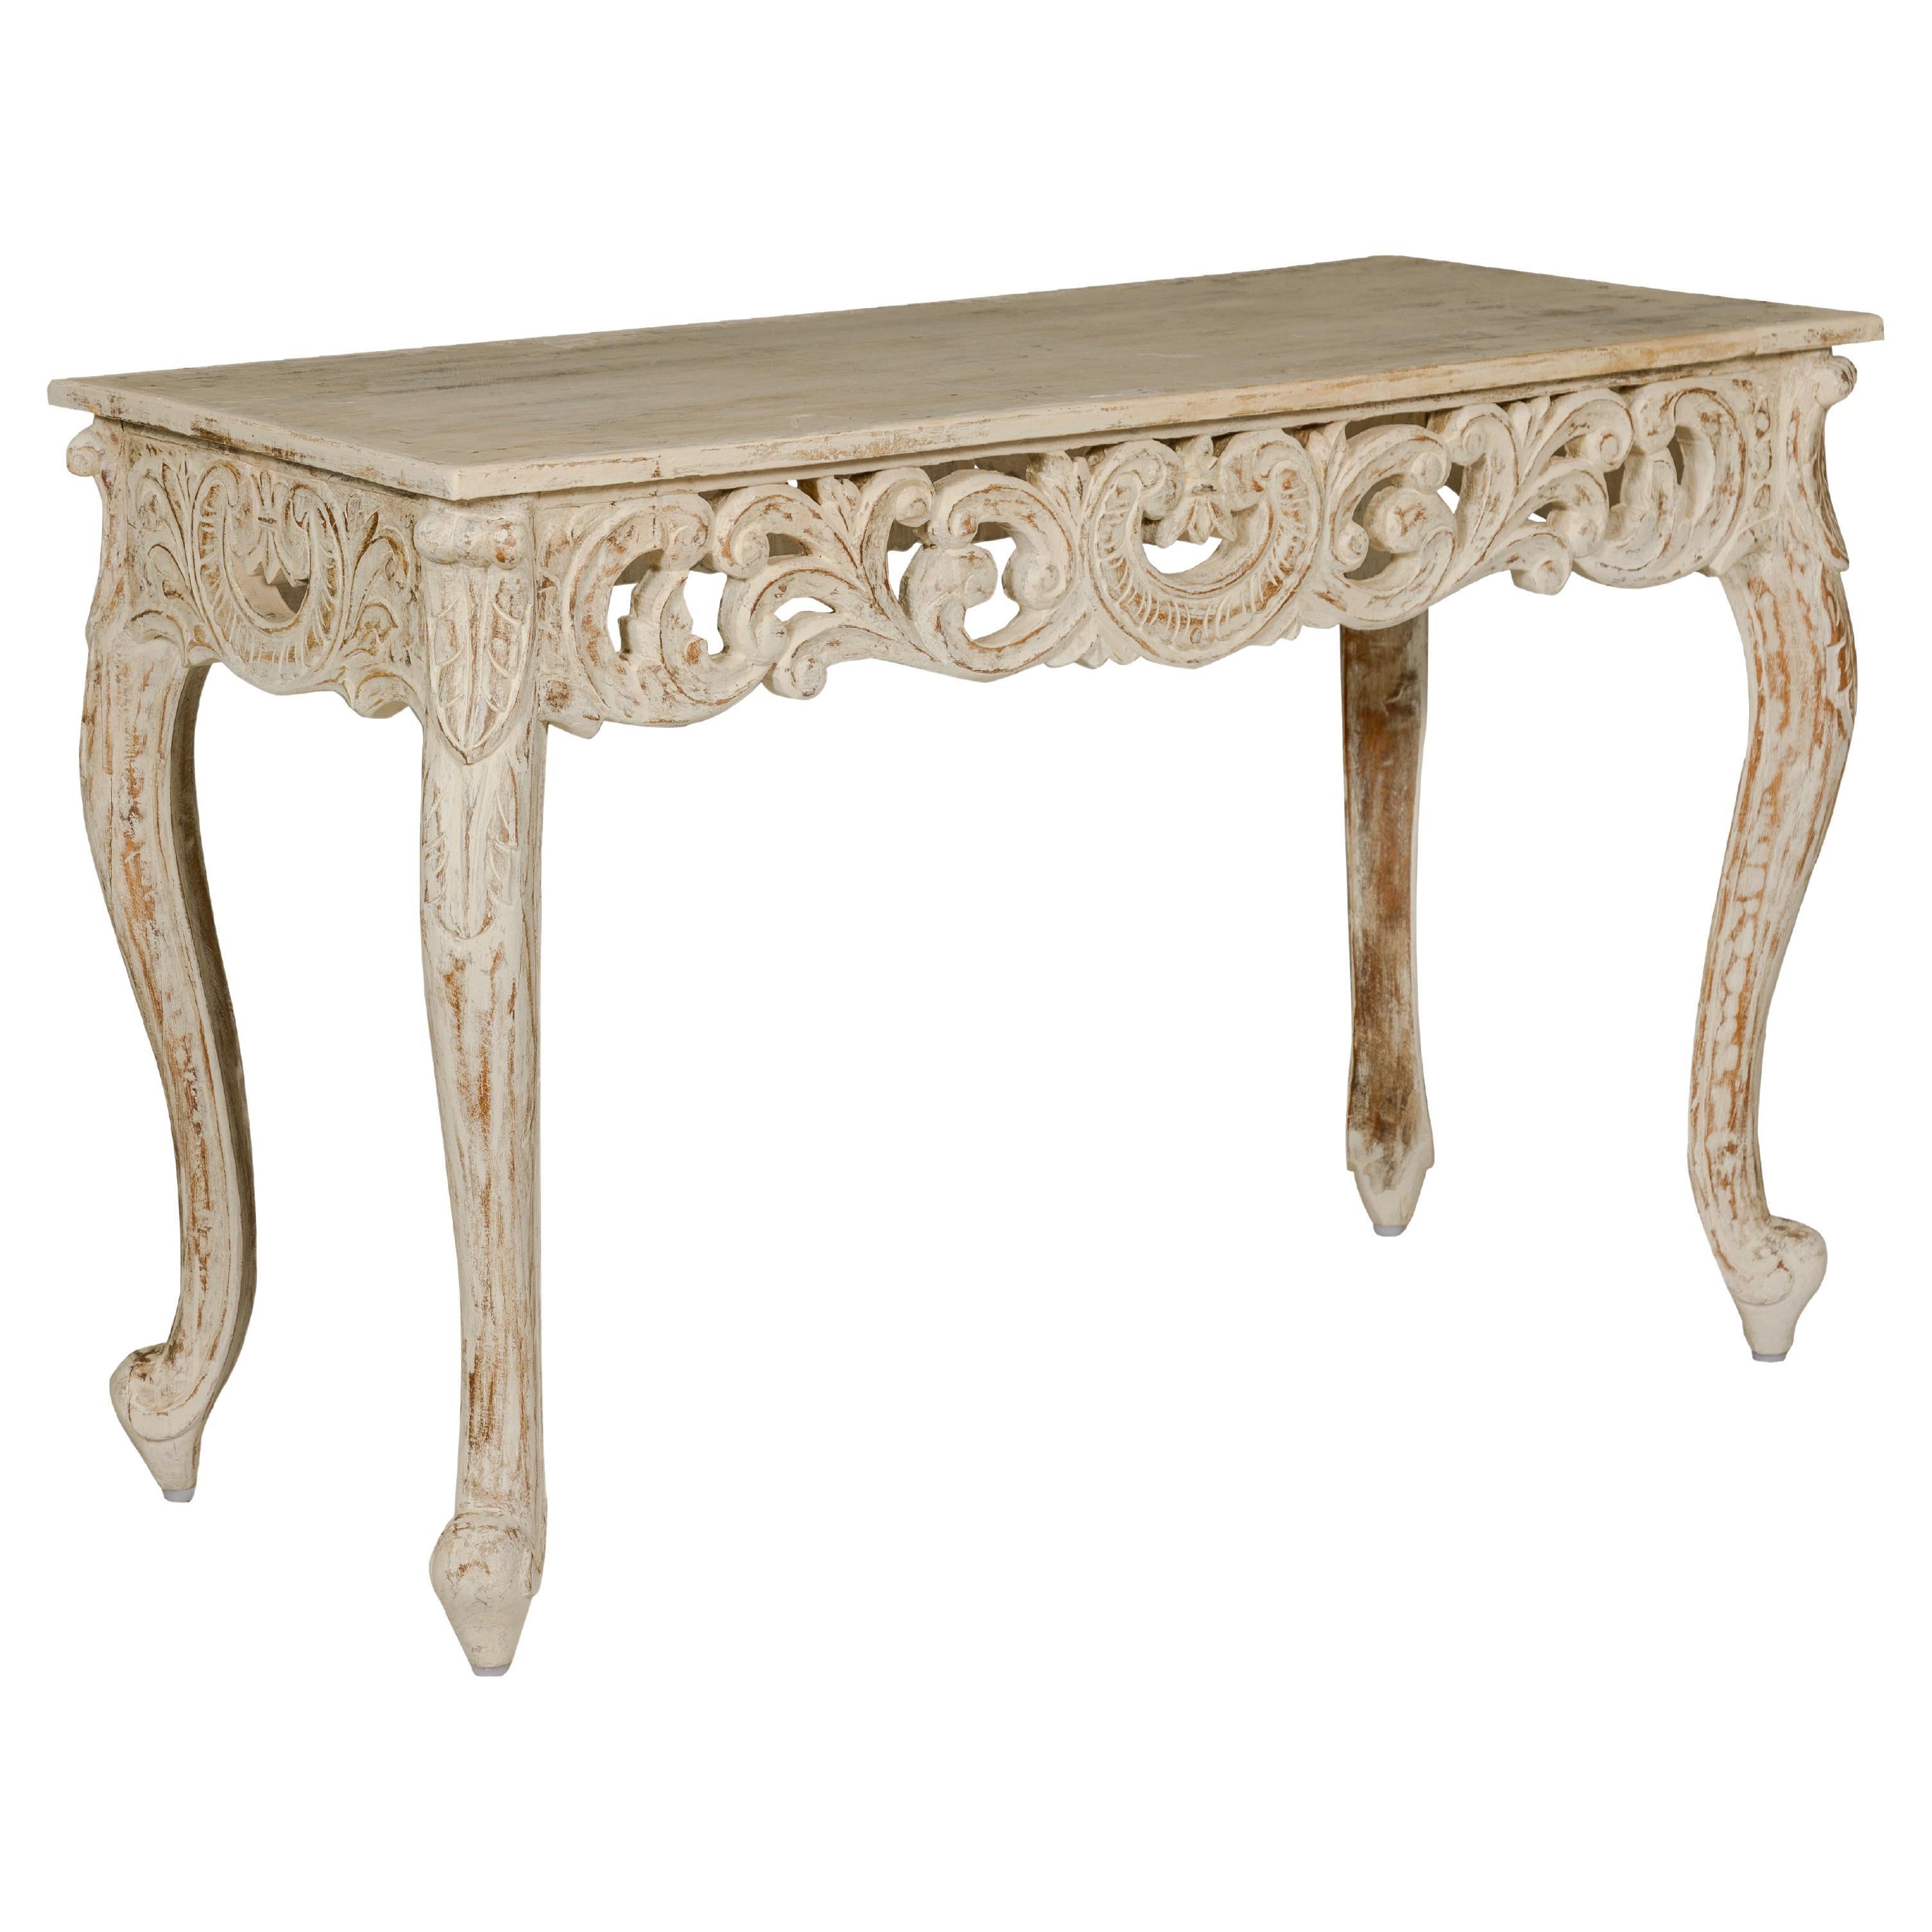 Rococo Style Painted Console Table with Carved Apron and Distressed Finish For Sale